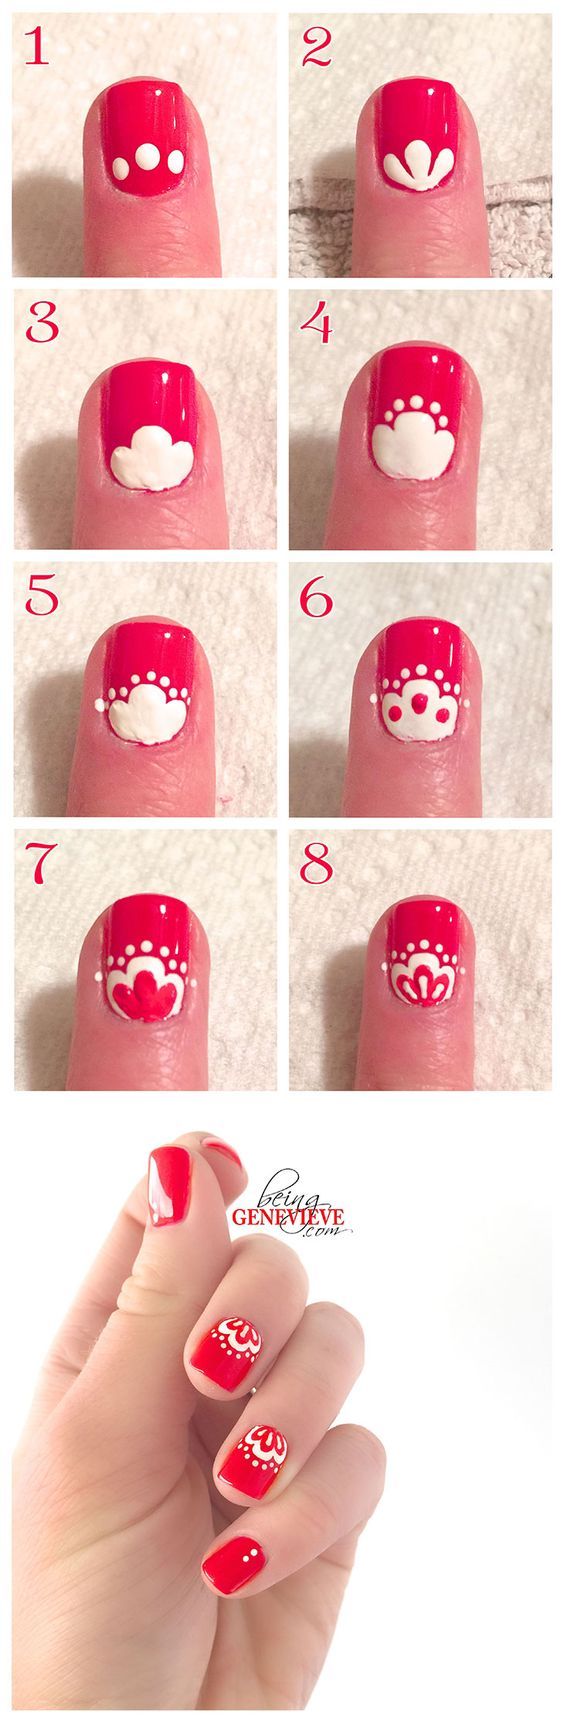 White and pink oriental lace nails art tutorials